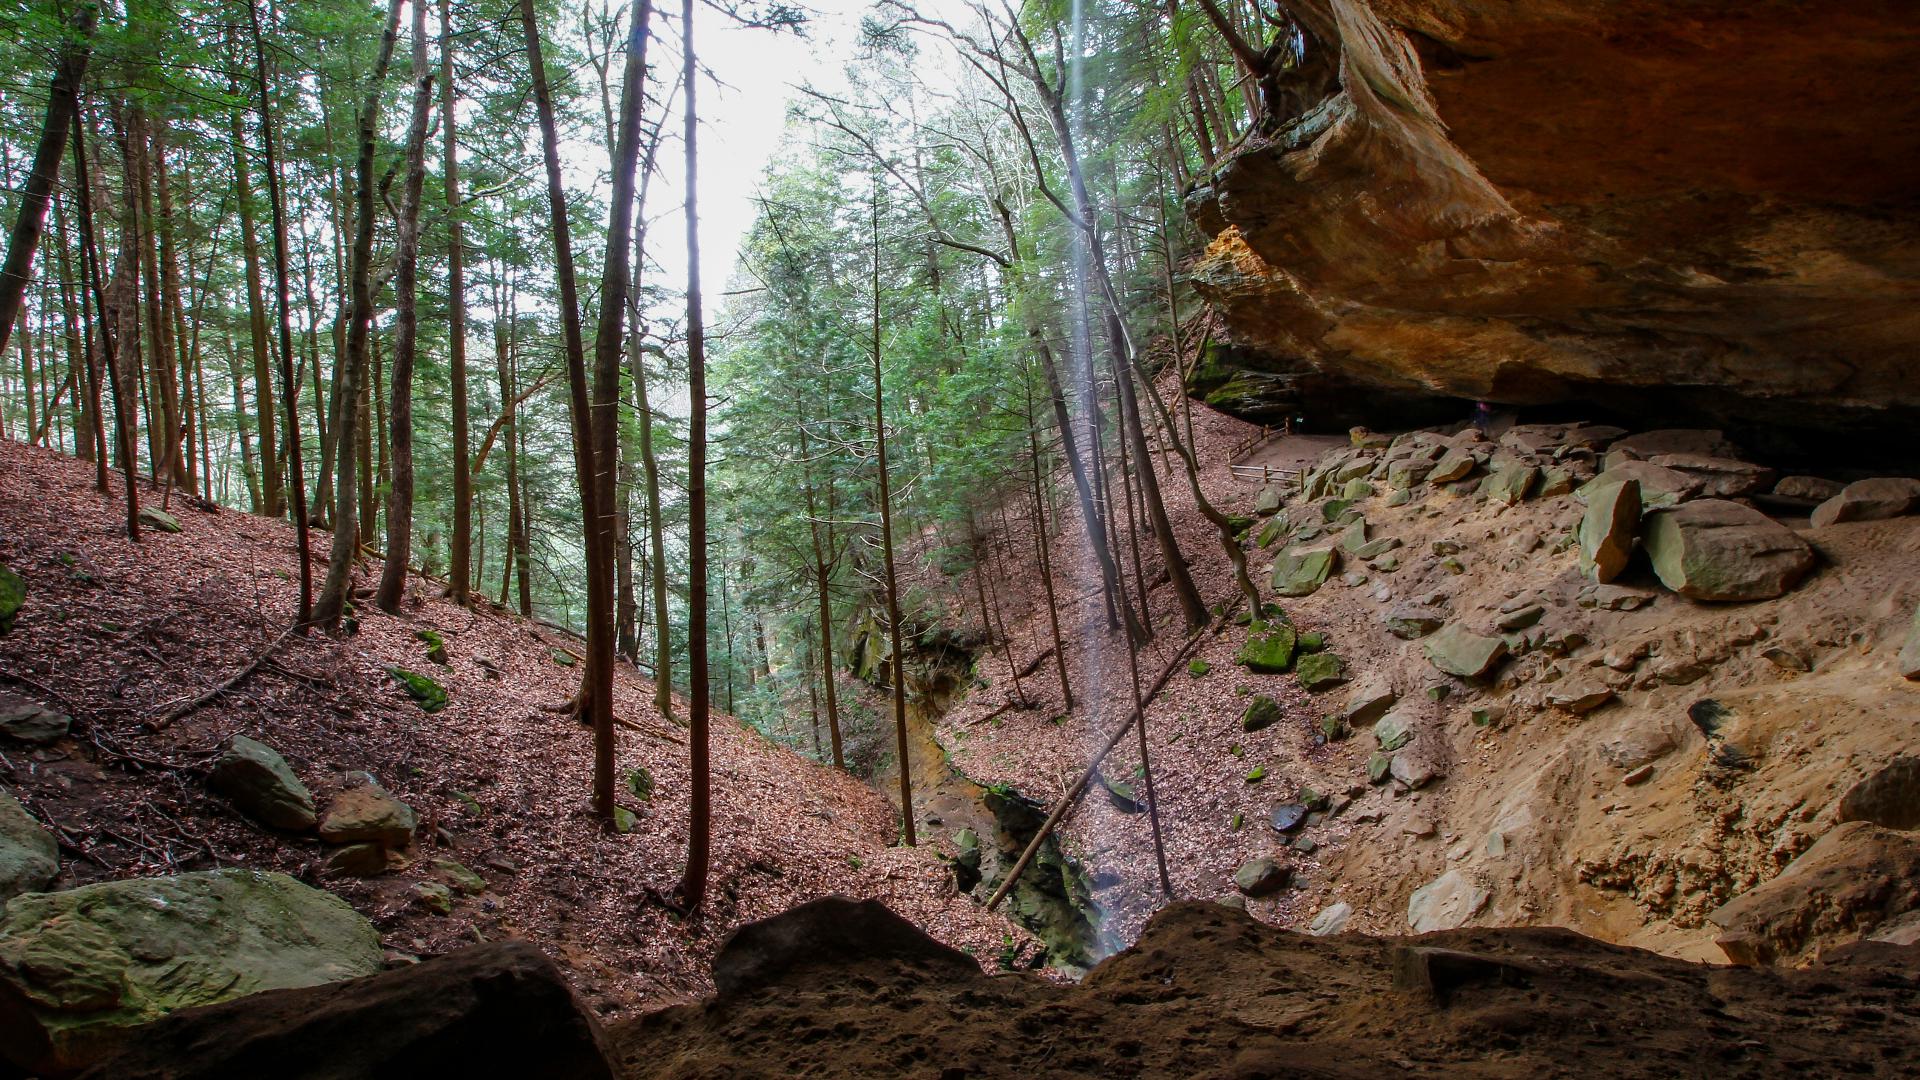 The 4.5-mile loop is listed as “difficult” and has a swinging bridge, the region's second-largest cave and a 105-foot seasonal waterfall along the route.